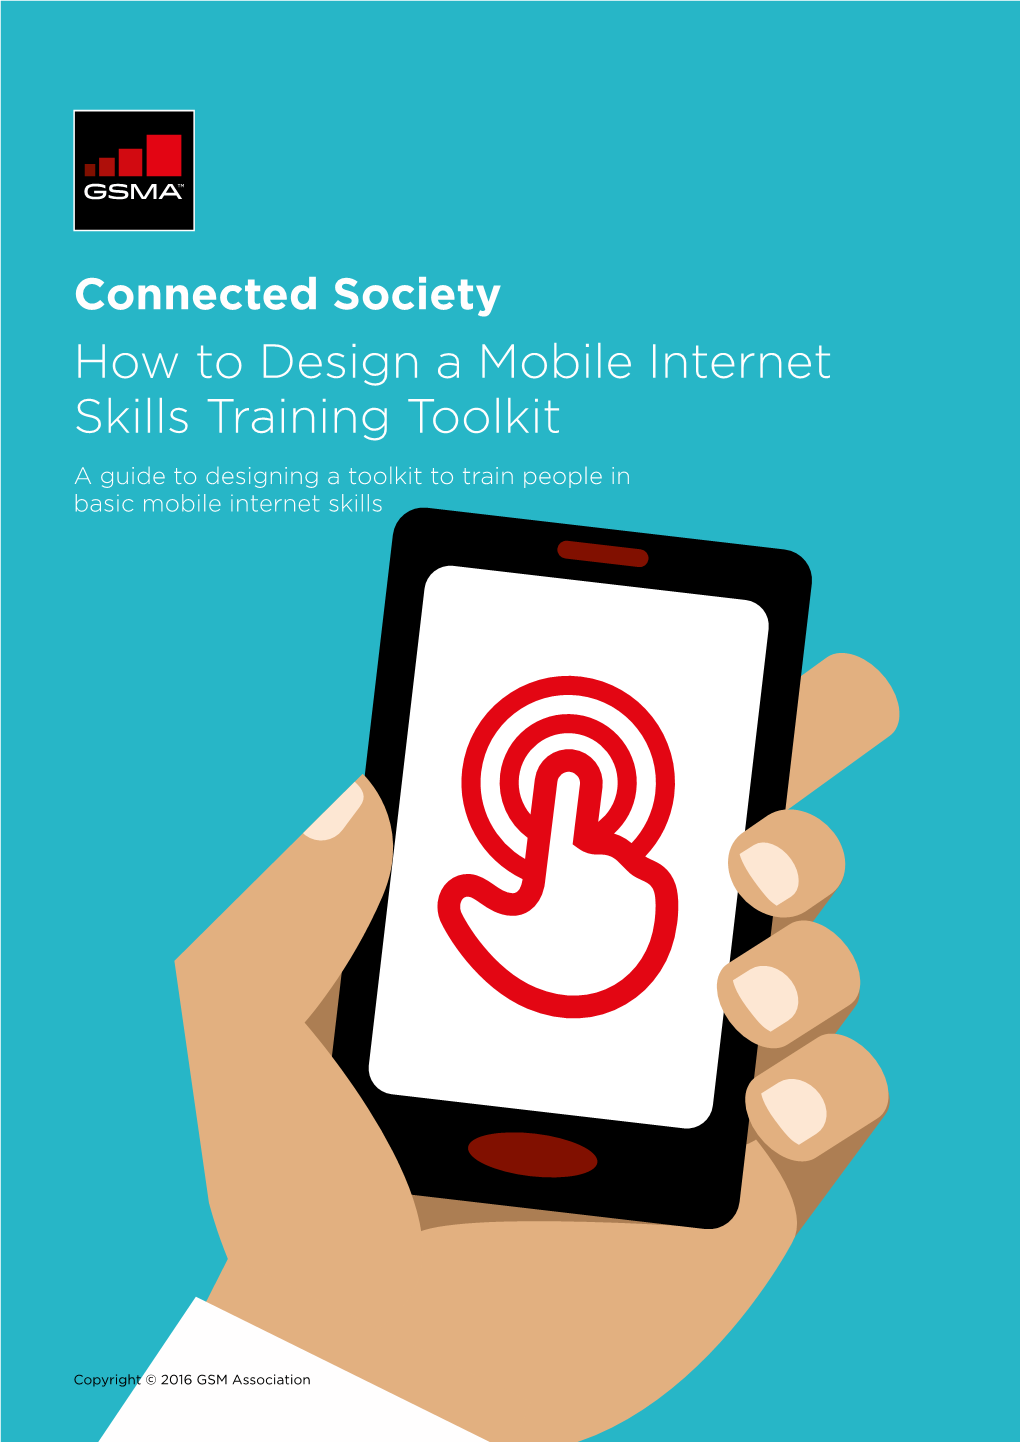 How to Design a Mobile Internet Skills Training Toolkit a Guide to Designing a Toolkit to Train People in Basic Mobile Internet Skills